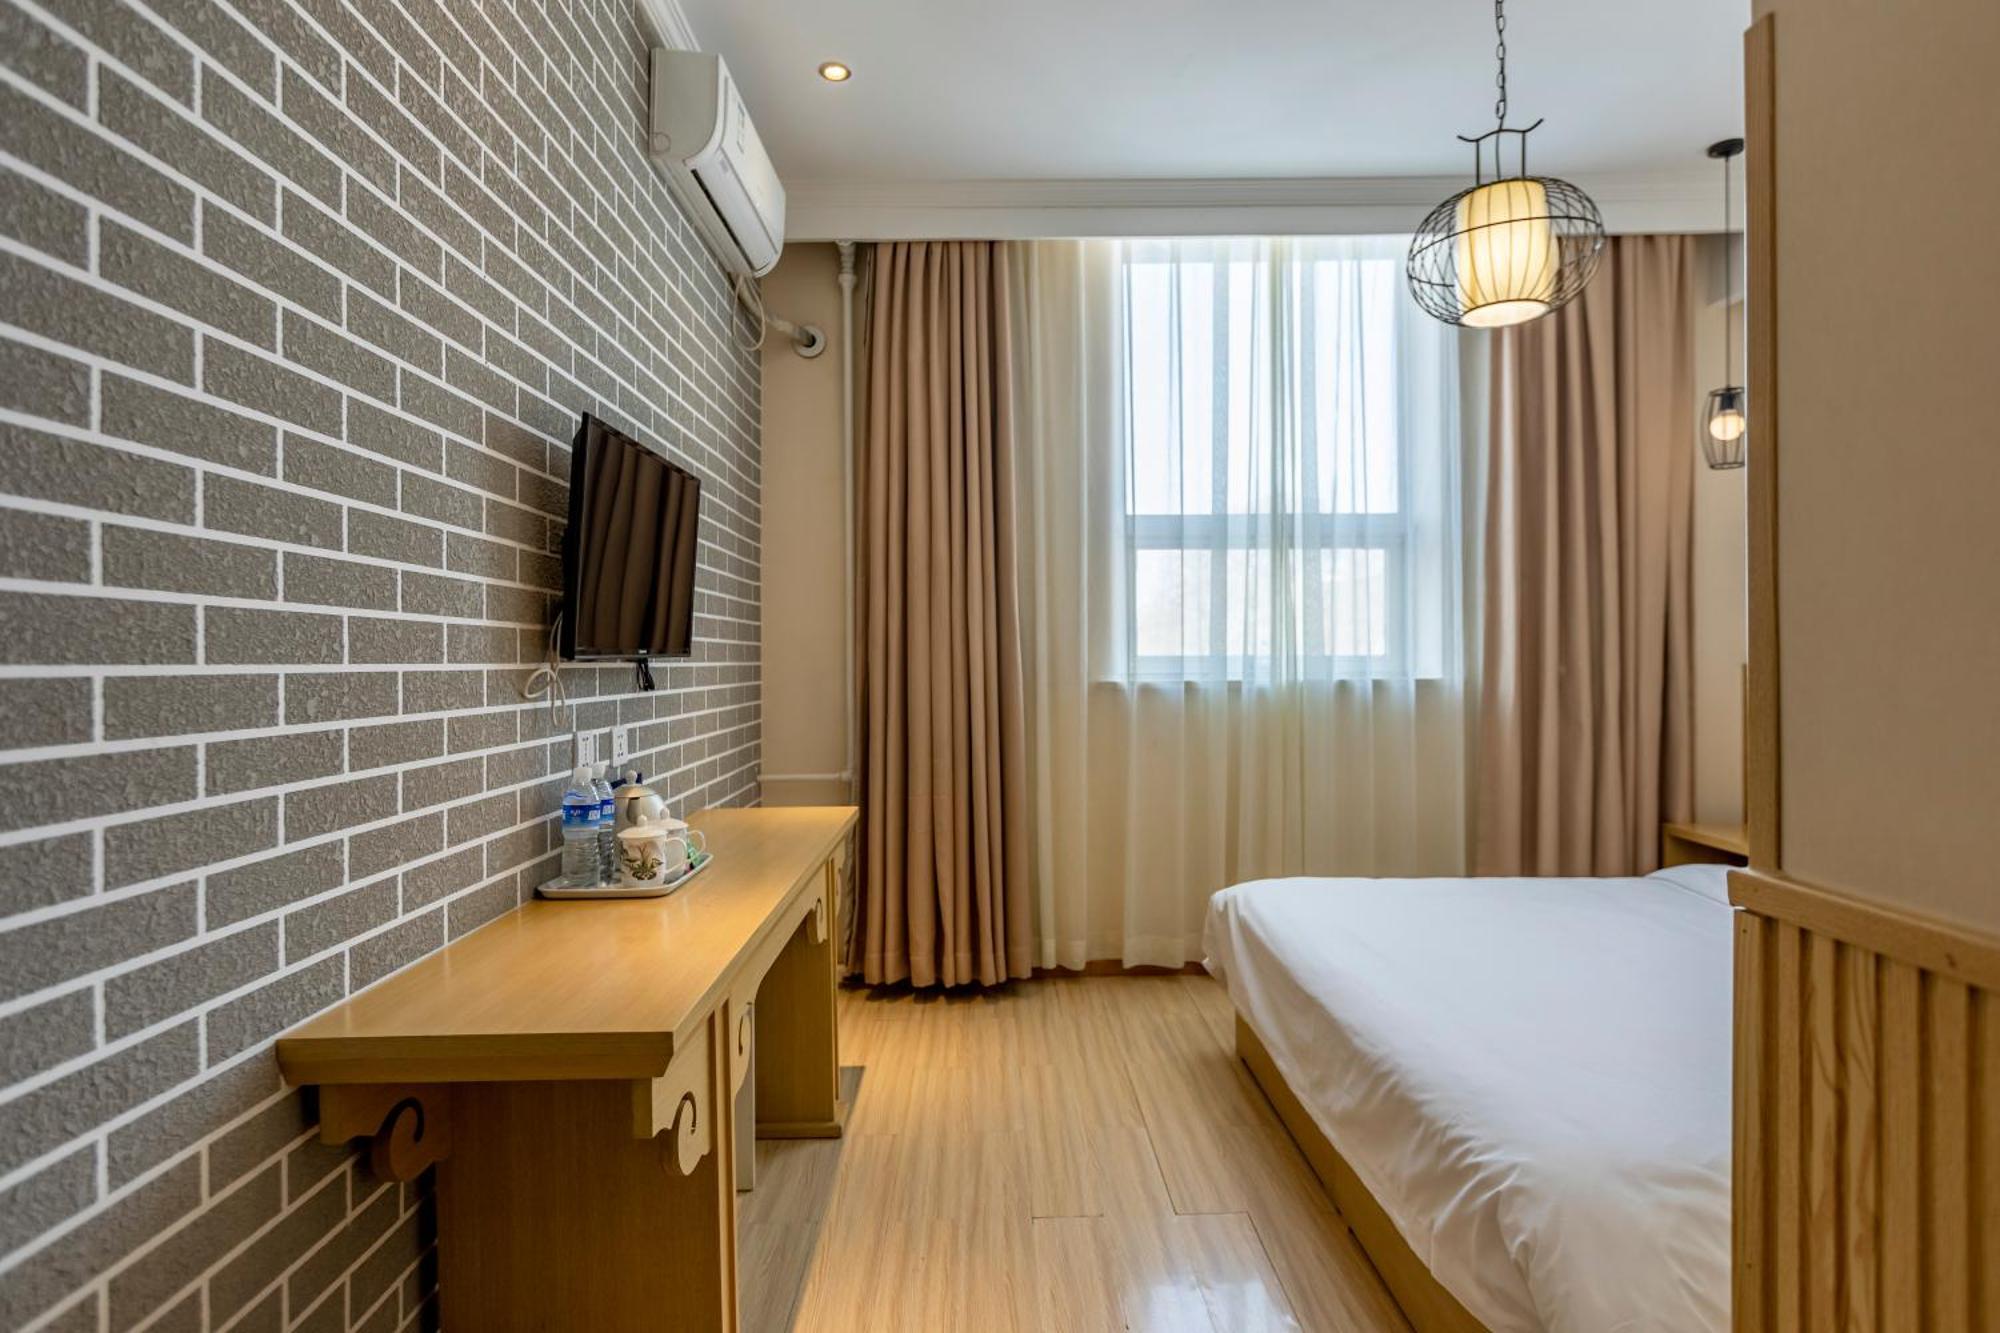 Happy Dragon Alley Hotel-In The City Center With Big Window&Free Coffe, Fluent English Speaking,Tourist Attractions Ticket Service&Food Recommendation,Near Tian Anmen Forbiddencity,Near Lama Temple,Easy To Walk To Nanluoalley&Shichahai בייג'ינג מראה חיצוני תמונה